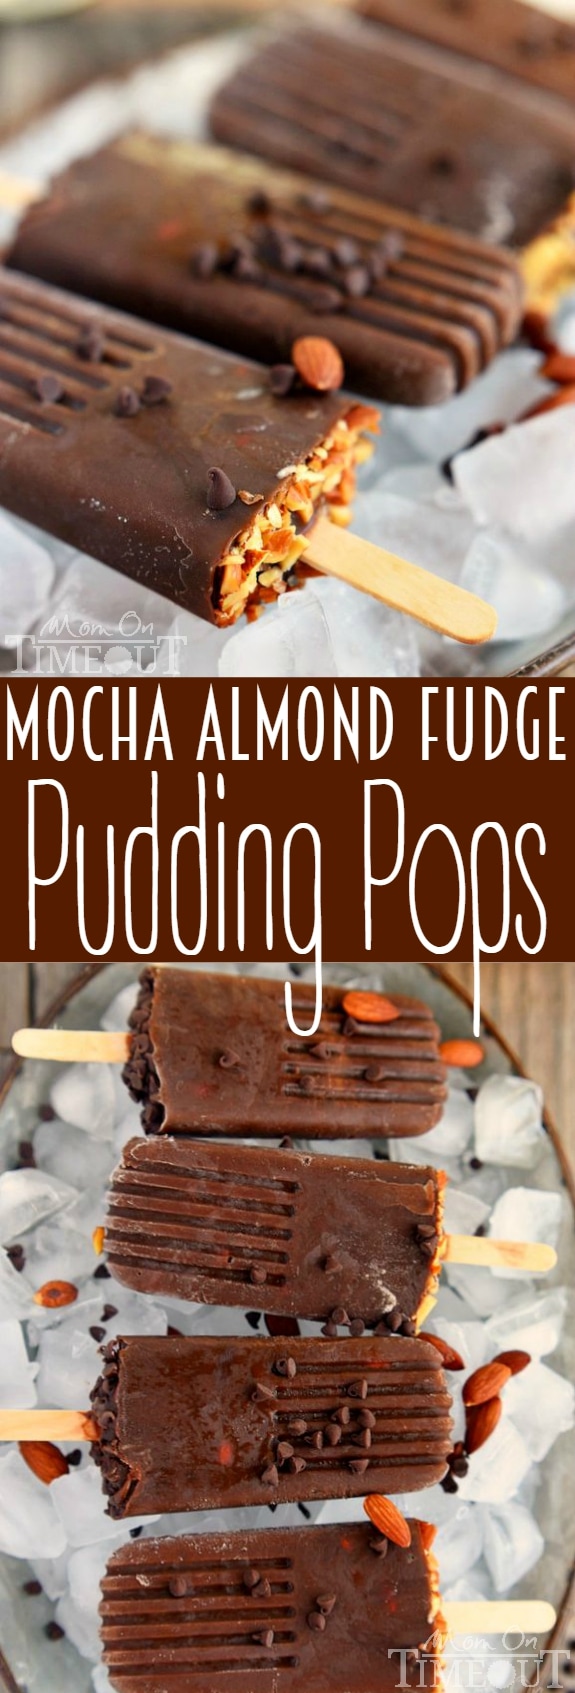 You are going to fall in love with these easy and delicious Mocha Almond Fudge Pudding Pops! Just perfect for hot summer days! | MomOnTimeout.com | #EasyAsBreeze #ad